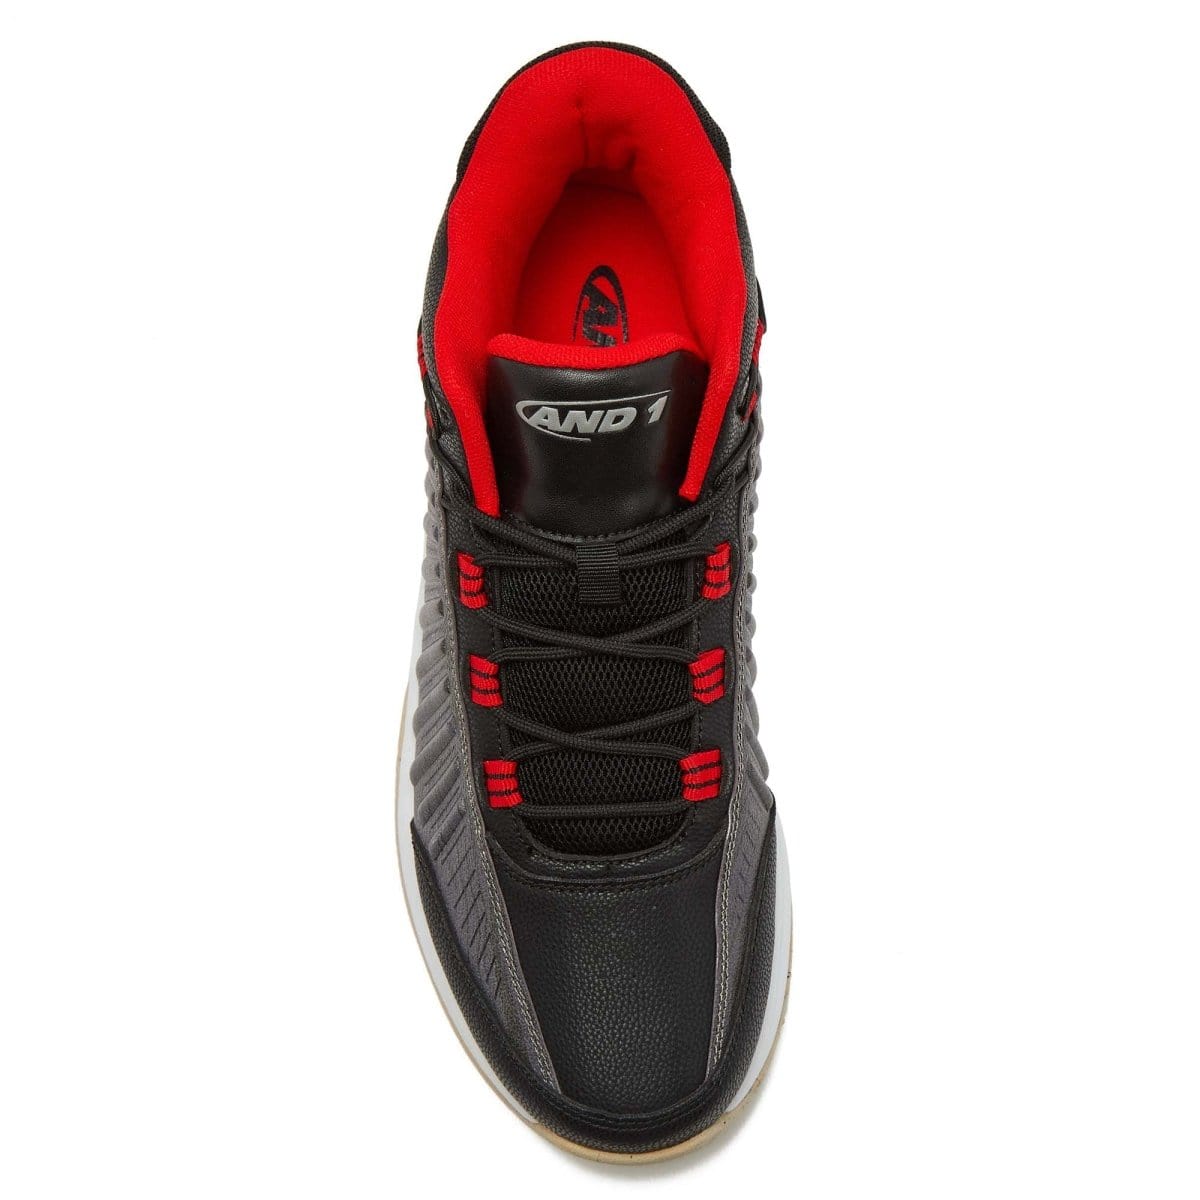 AND-1 AND-1 MEN'S EXPLOSIVE BLACK/RED BASKETBALL SHOES - INSPORT